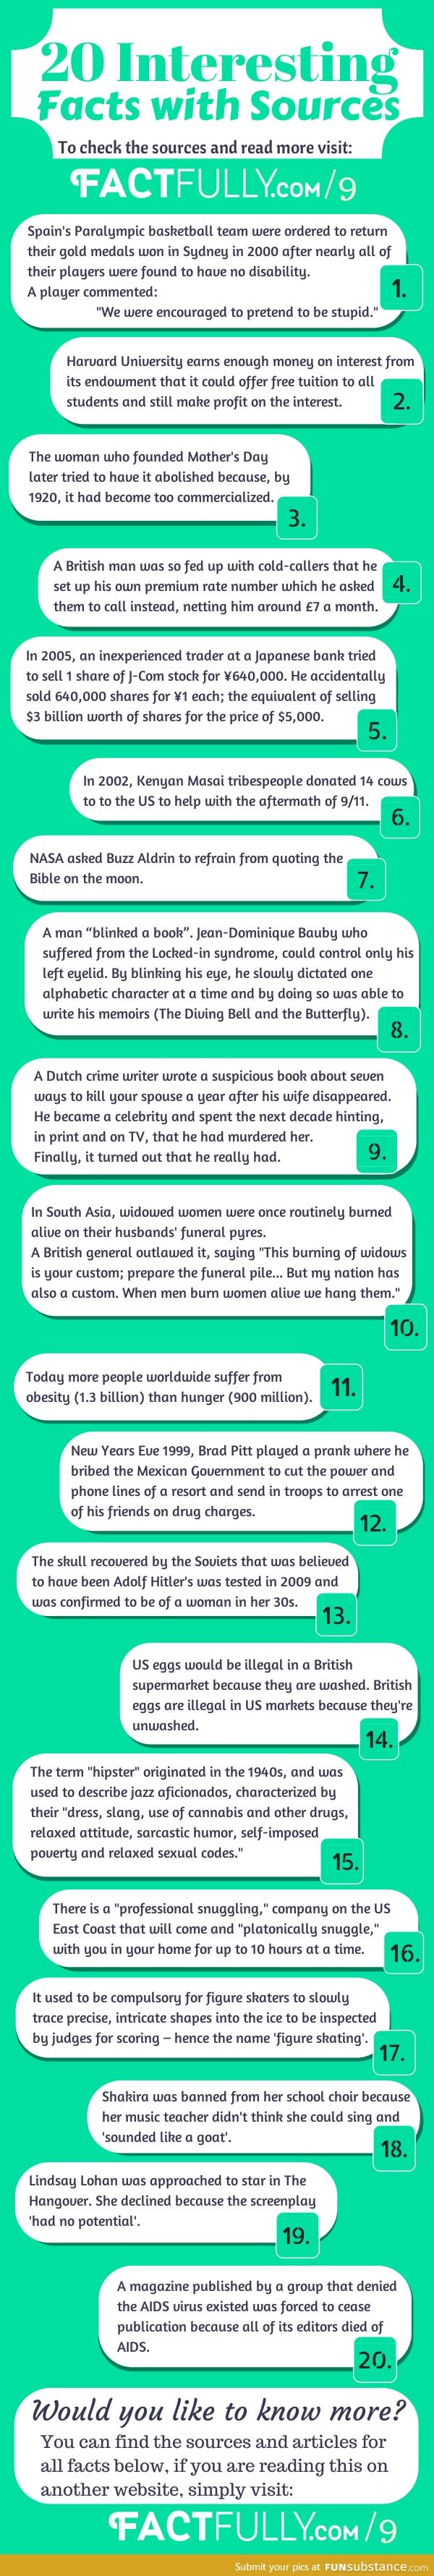 Some interesting facts